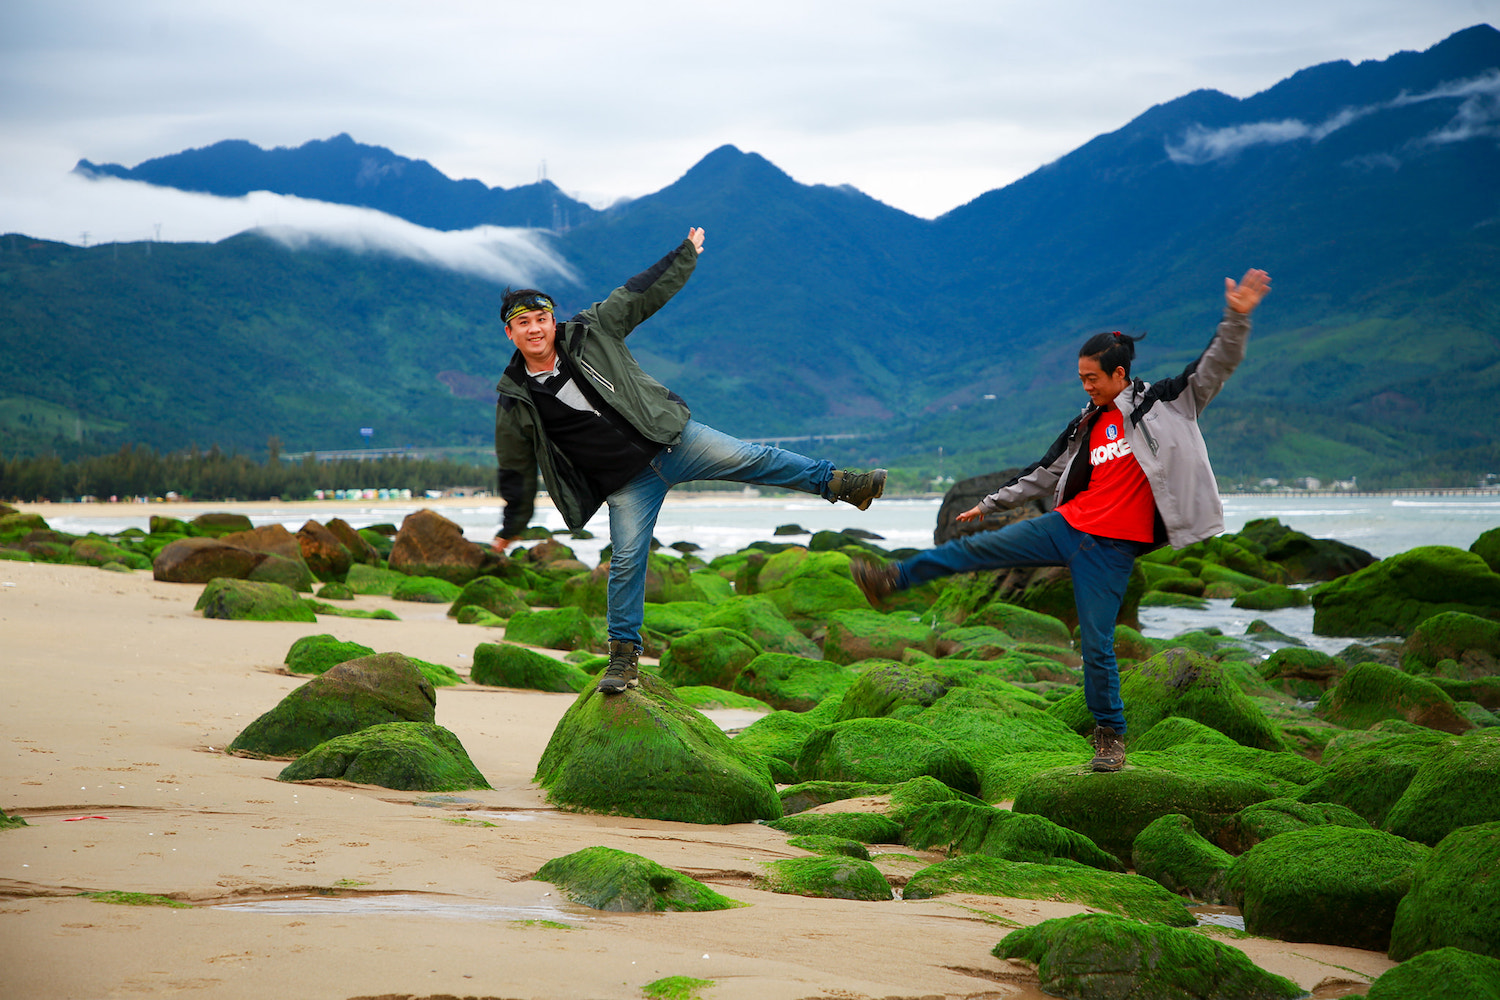 Thanh Tuan (R) and a friend pose at the Nam O Reef in Da Nang. Photo obtained by VnExpress